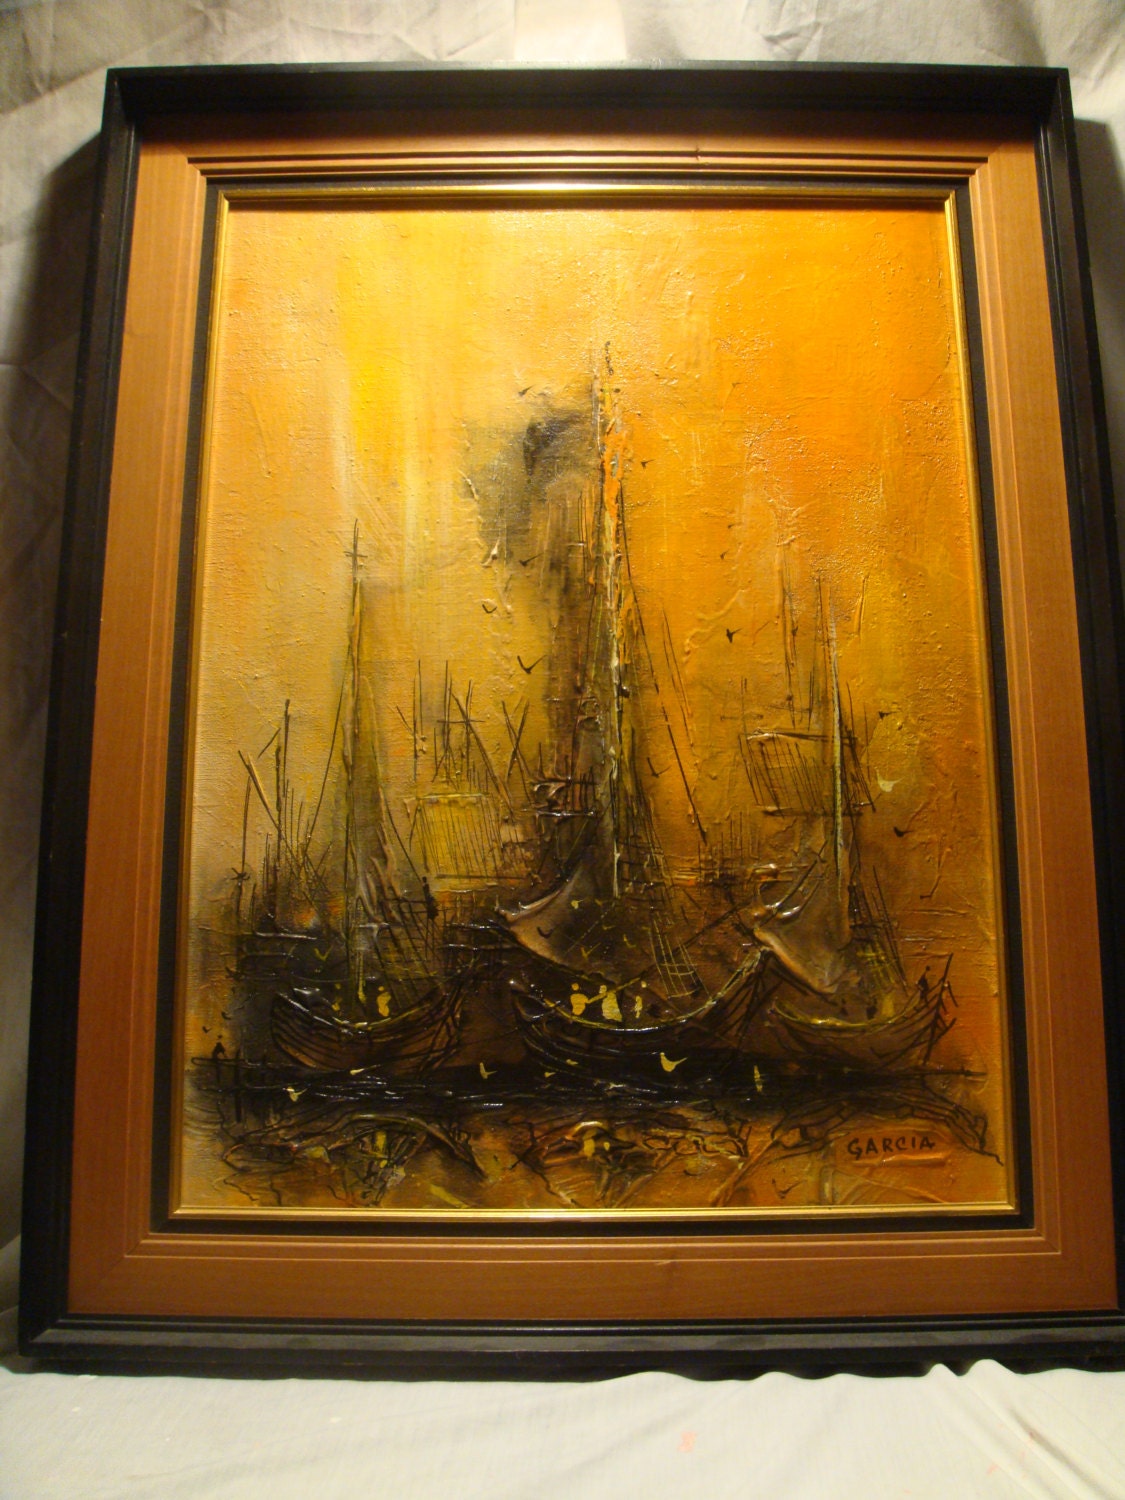 Tall Masts painting by Danny Garcia